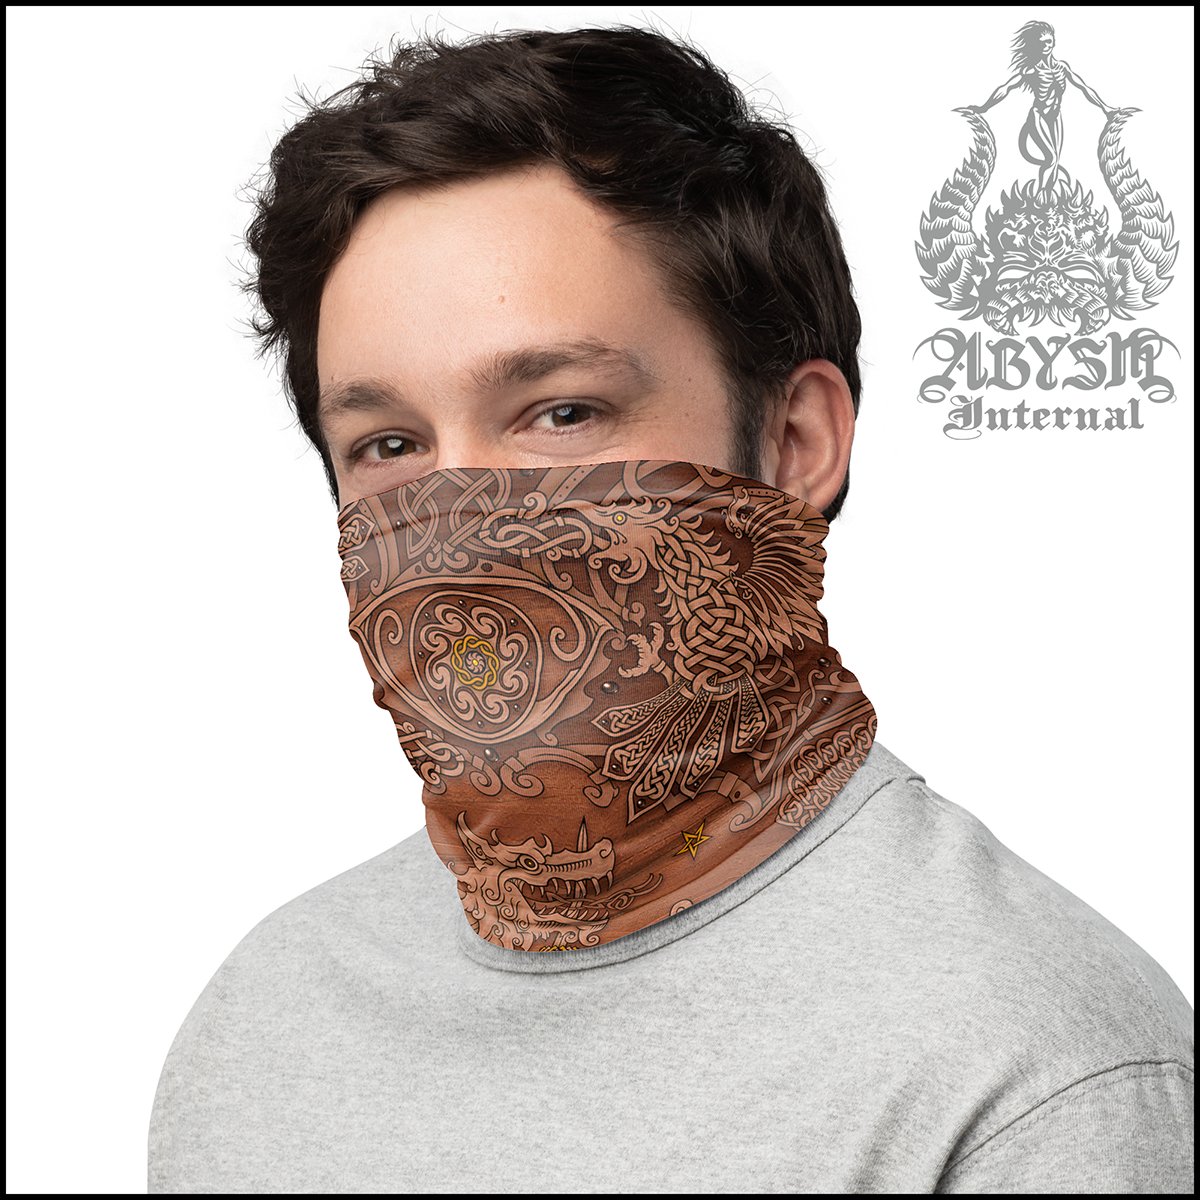 Nordic Art Neck Gaiter, Viking Face Mask, Fenrir Printed Head Covering, Norse Wolf - Wood - Abysm Internal